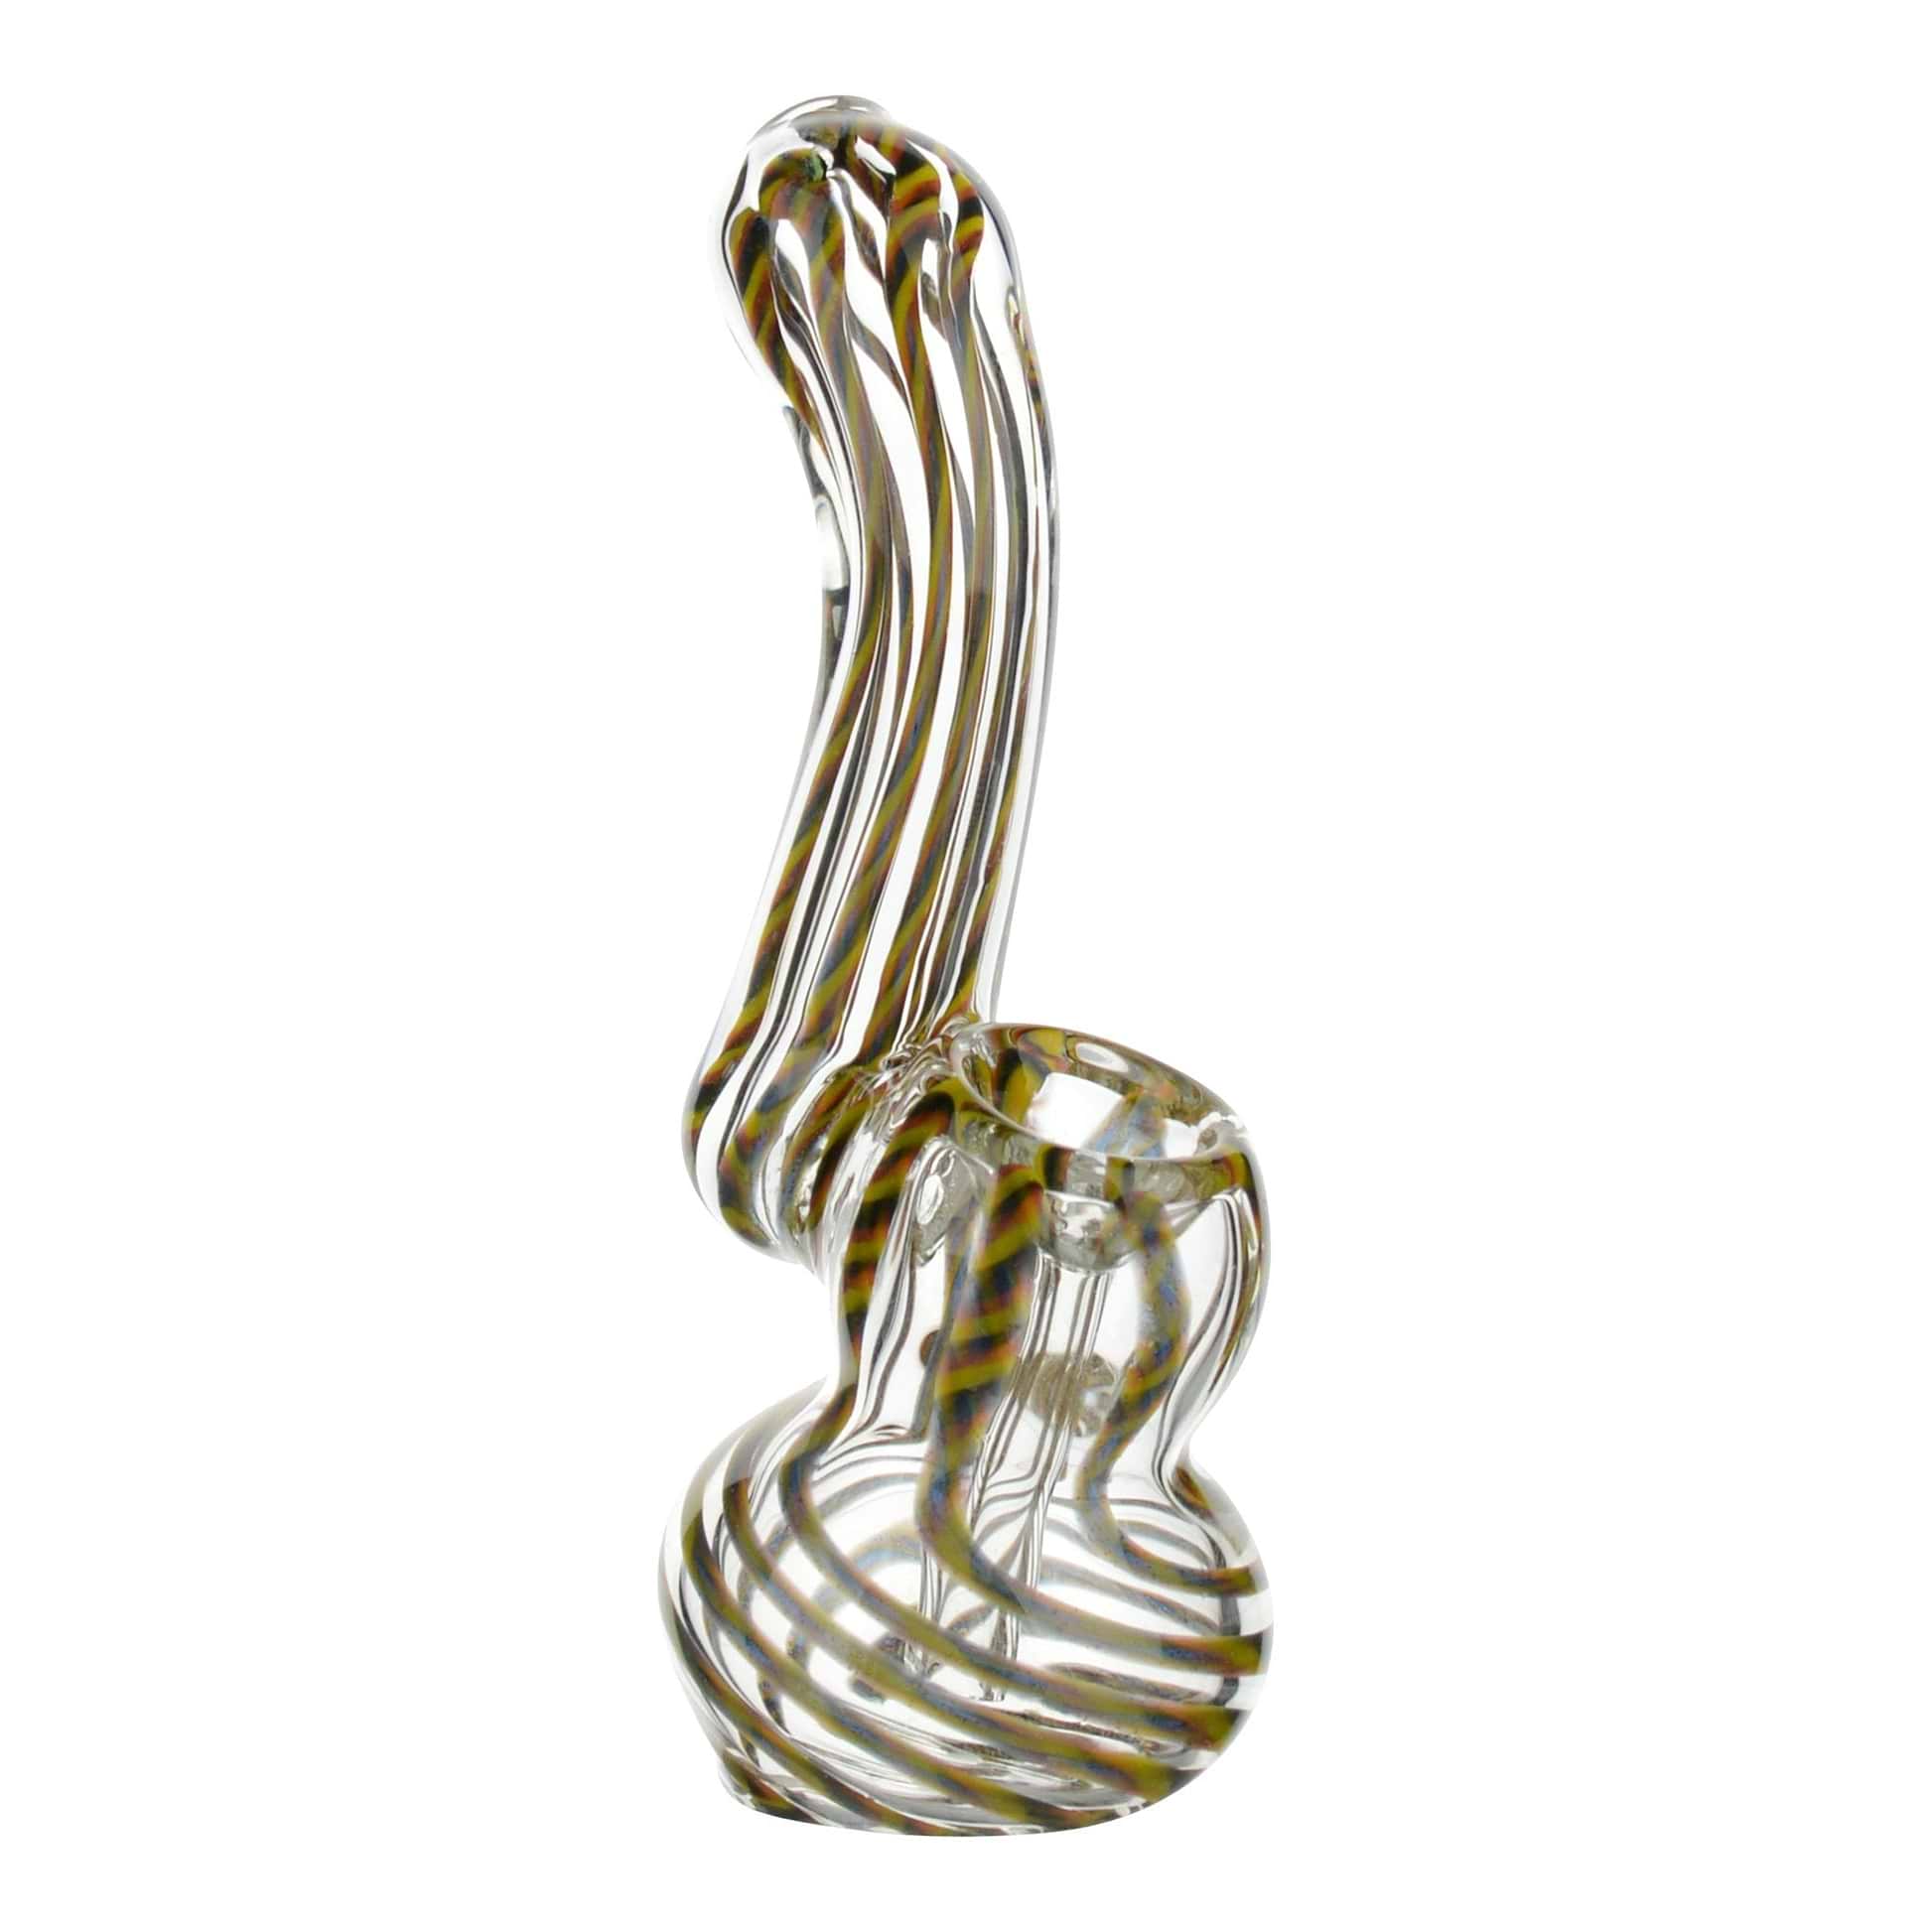 Full shot of tilted 4-inch sherlock stemmed glass mini bubbler with plaid swirls in tiger colors bowl visible